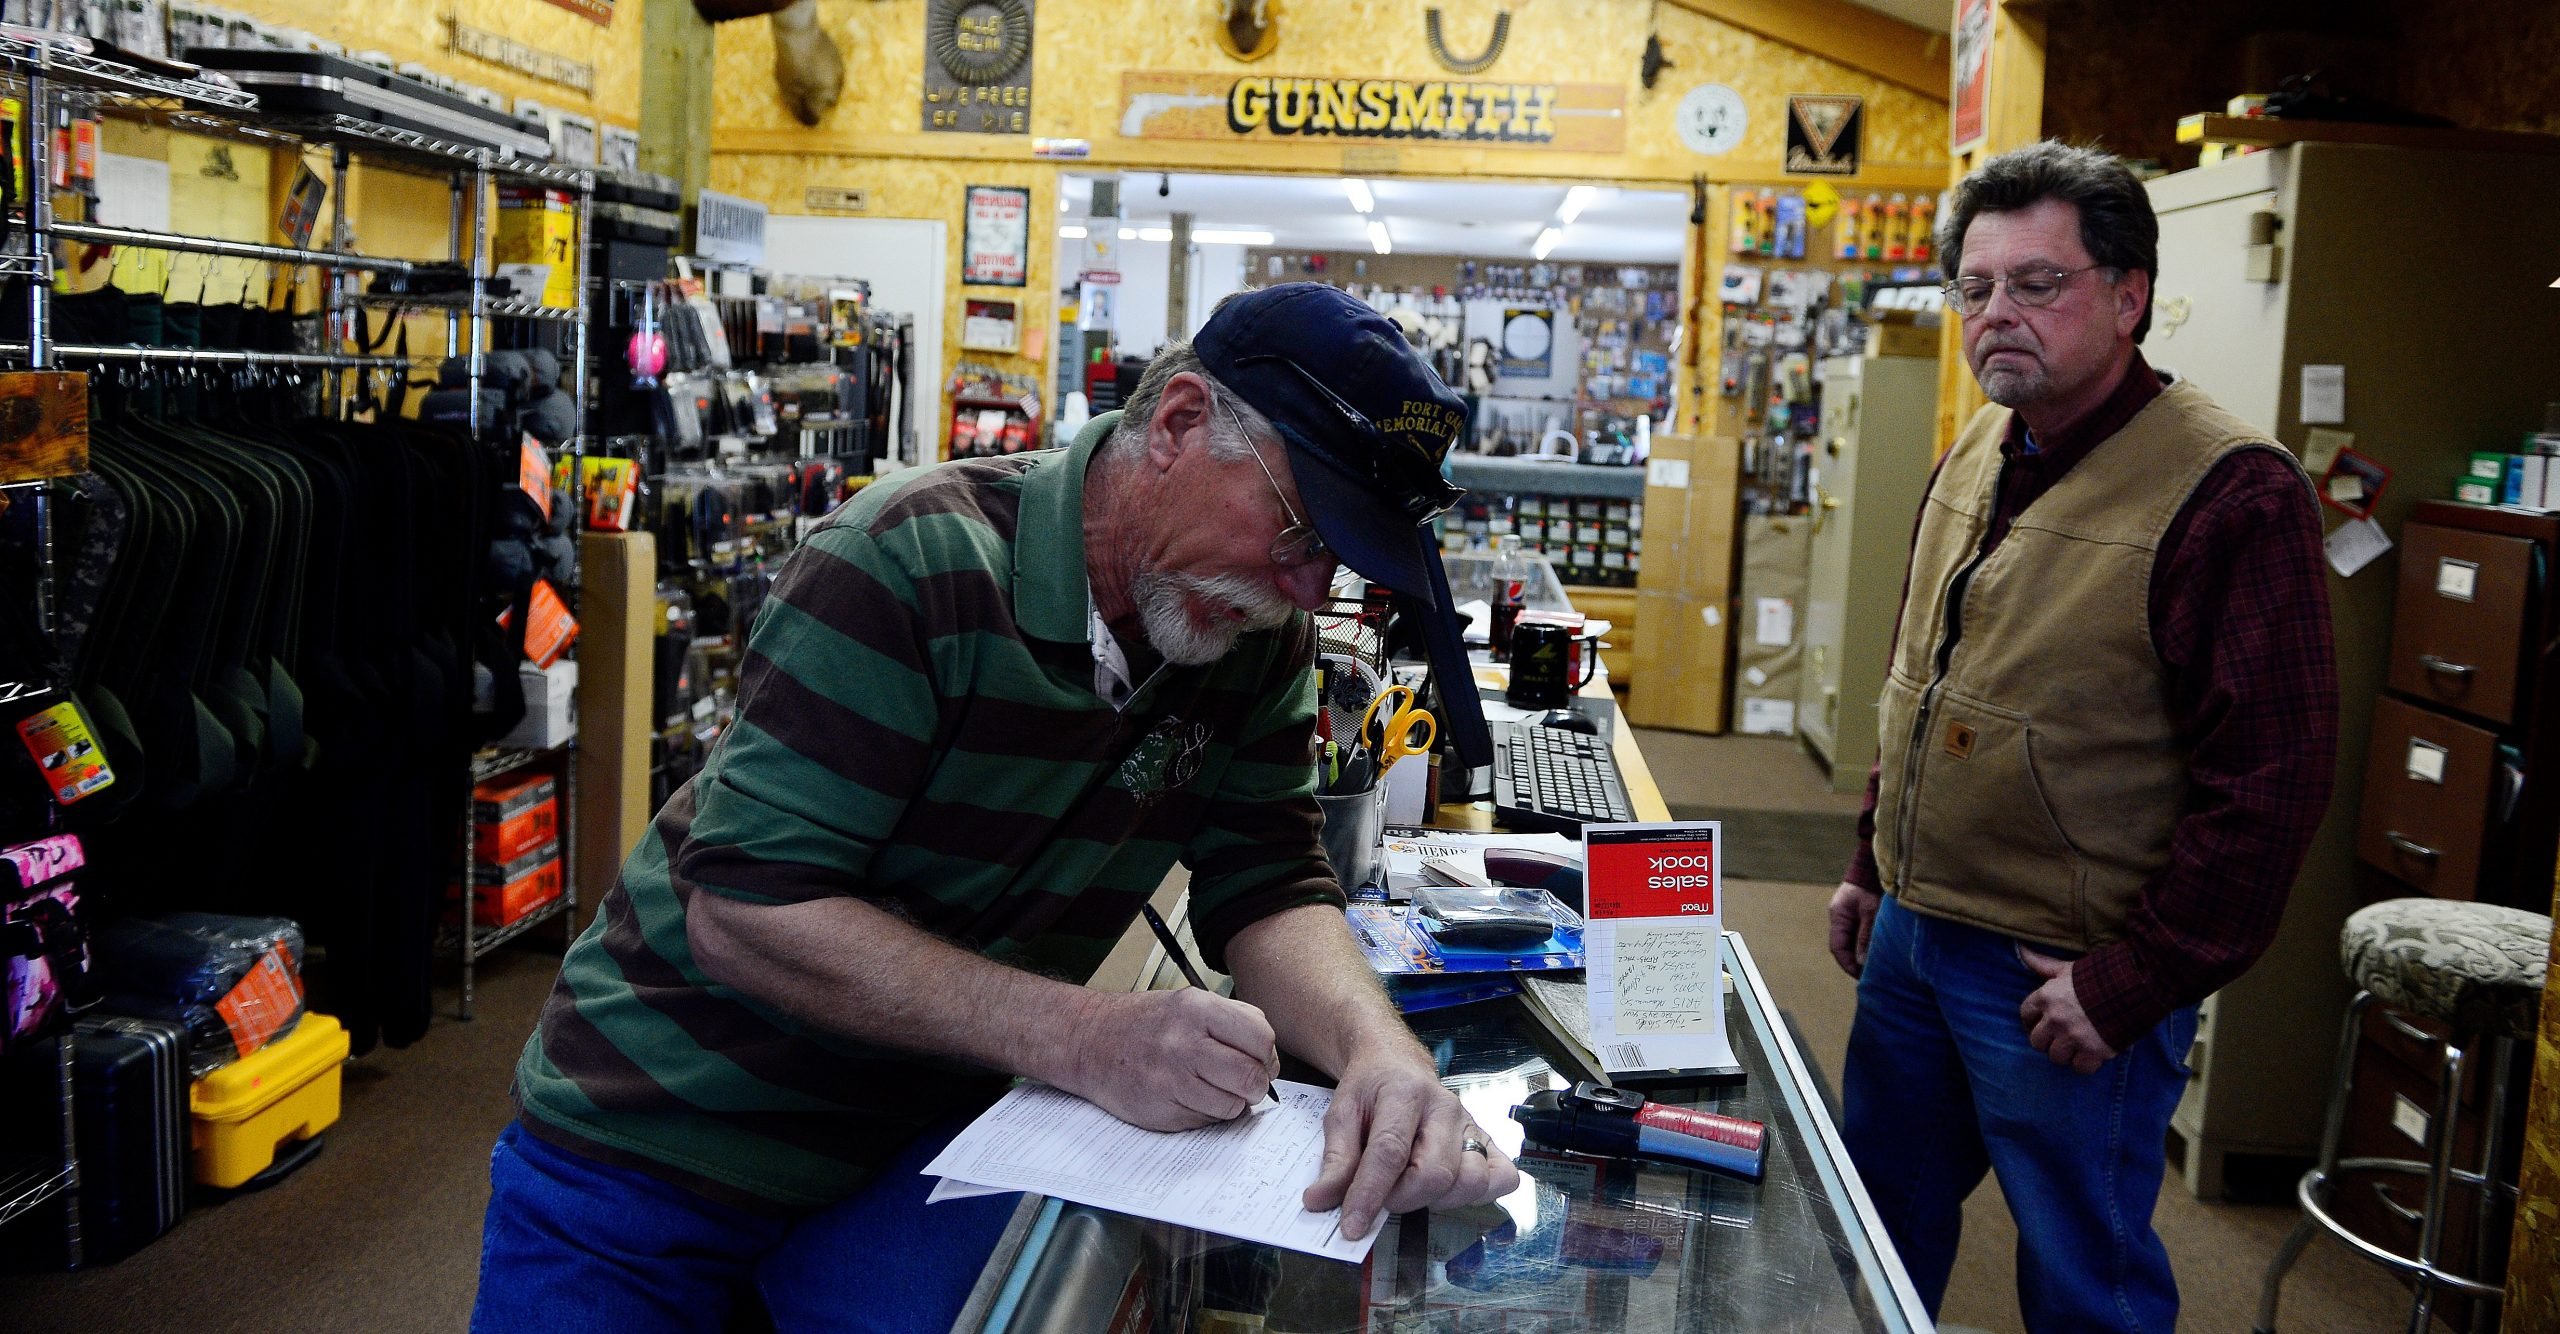 What We Know About the Effectiveness of Universal Gun Background Checks